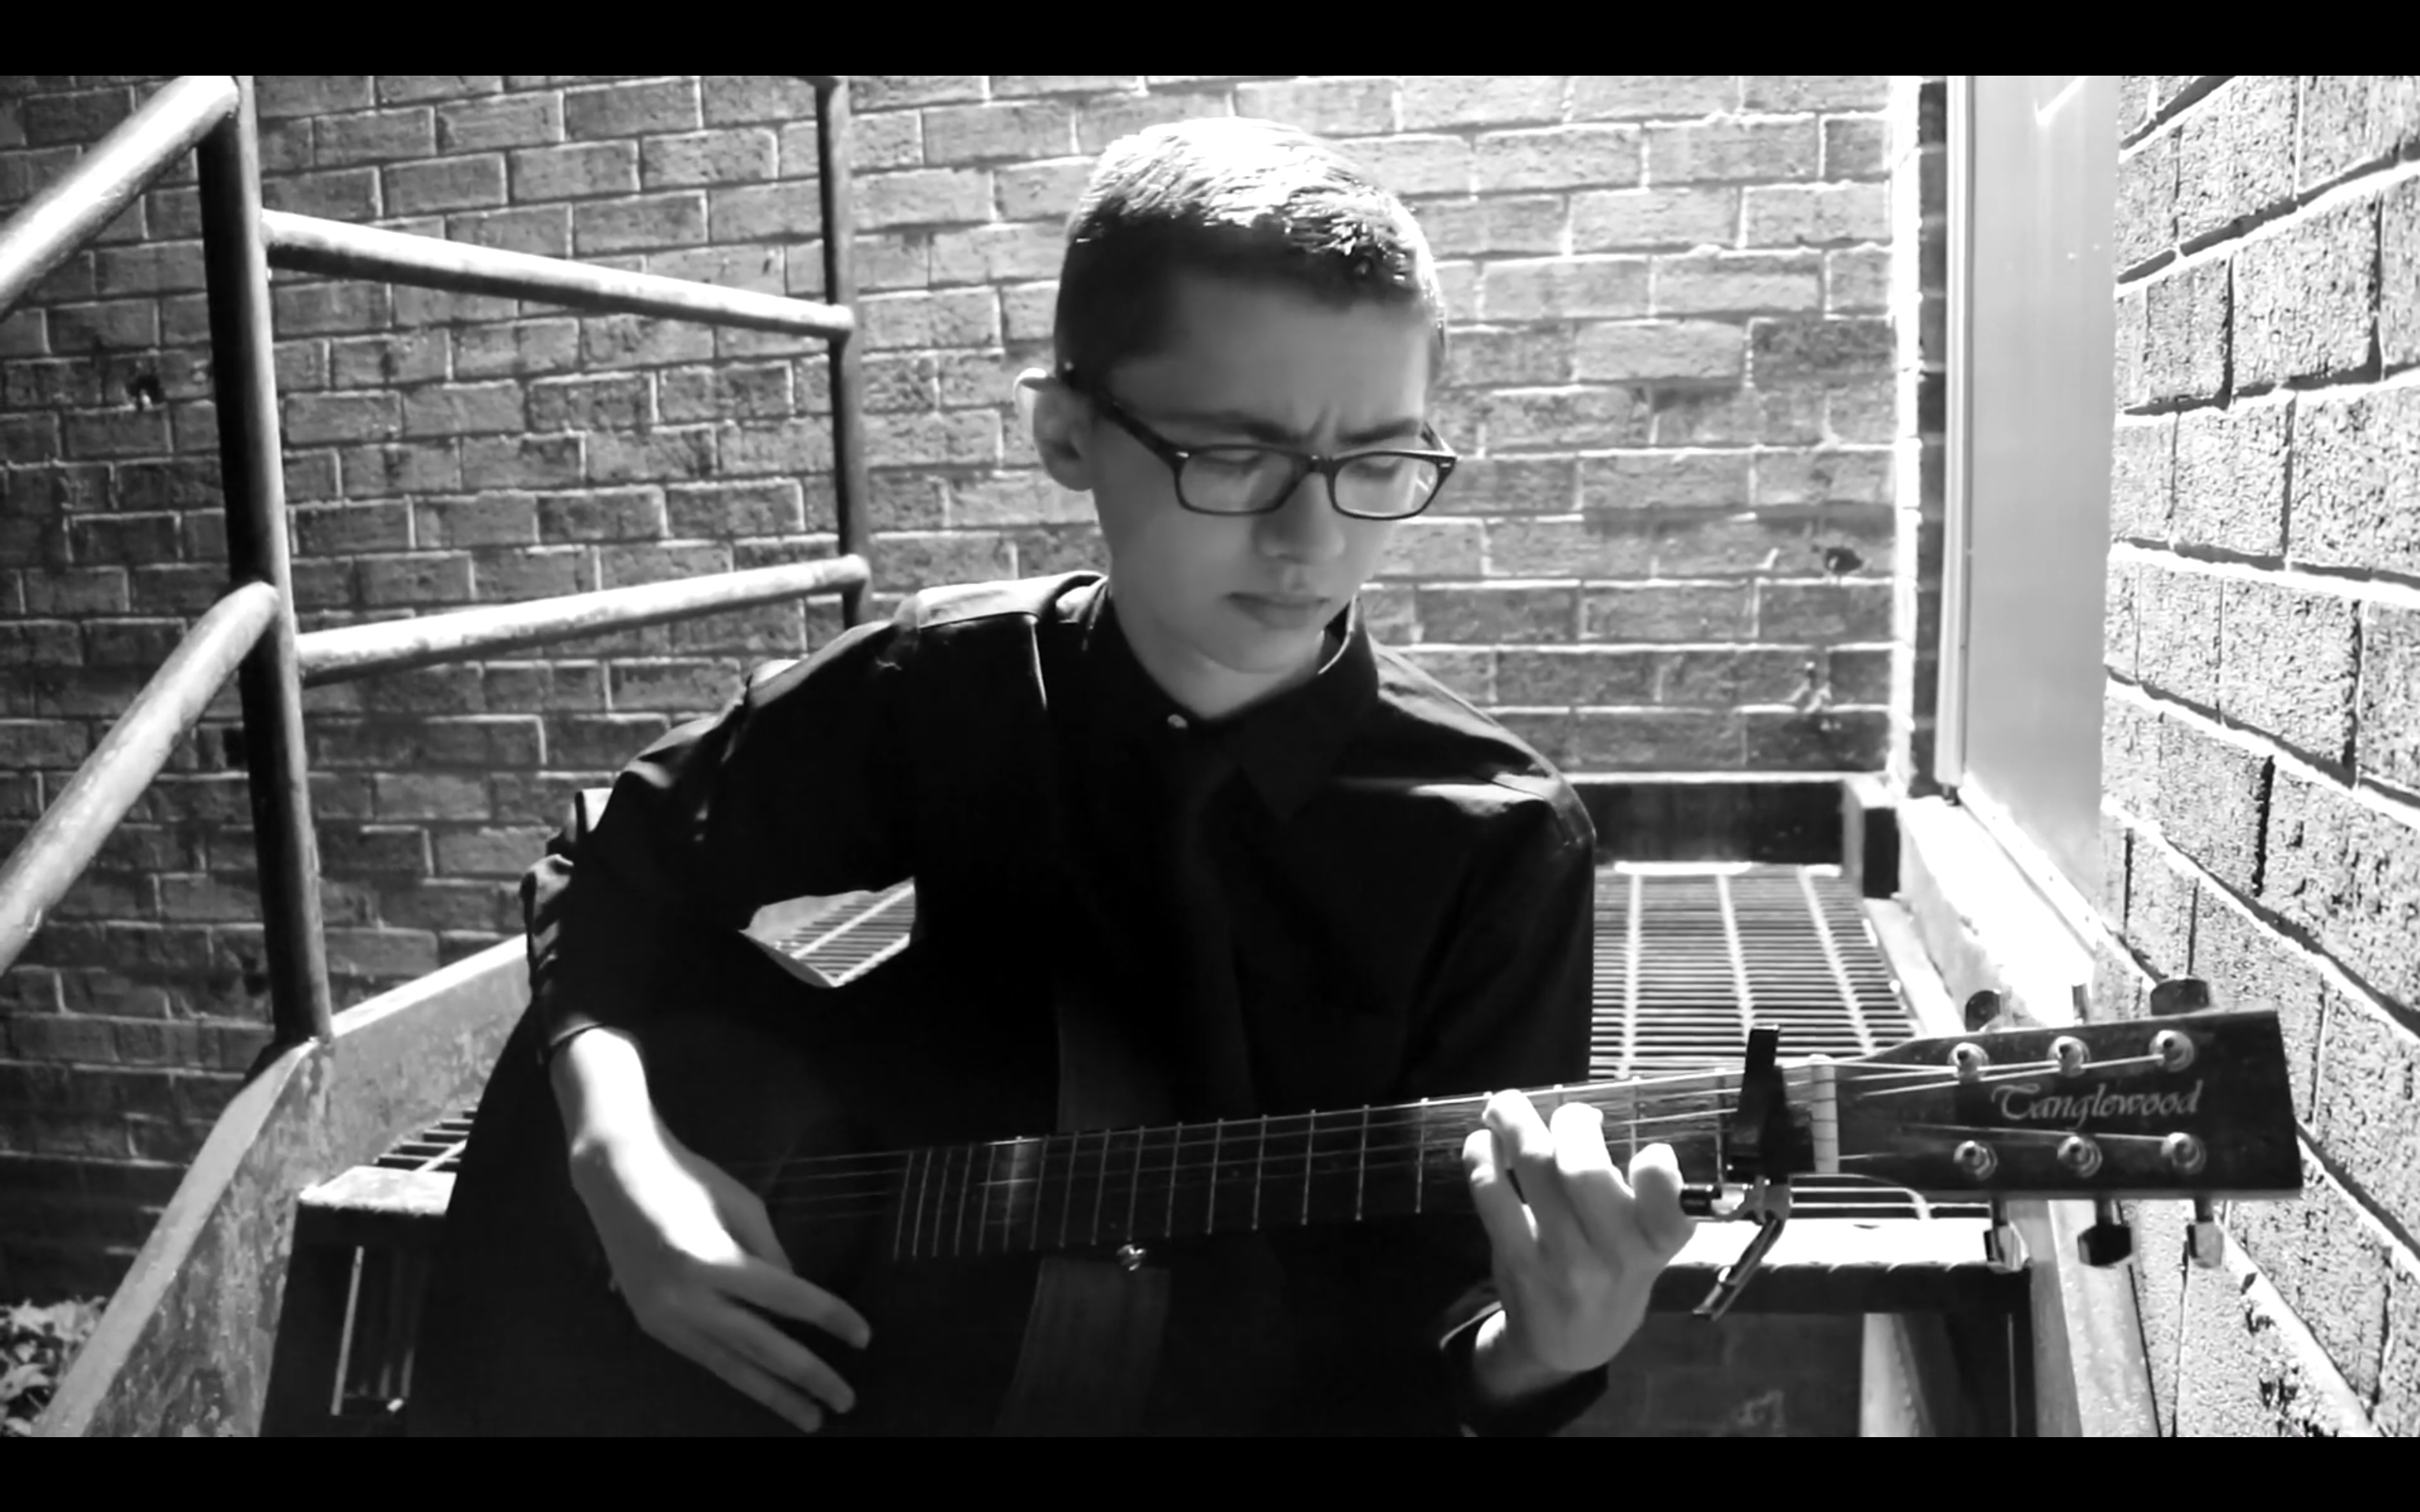 Elliott Fullam in Music Video: I Don't Want To Set The World On Fire